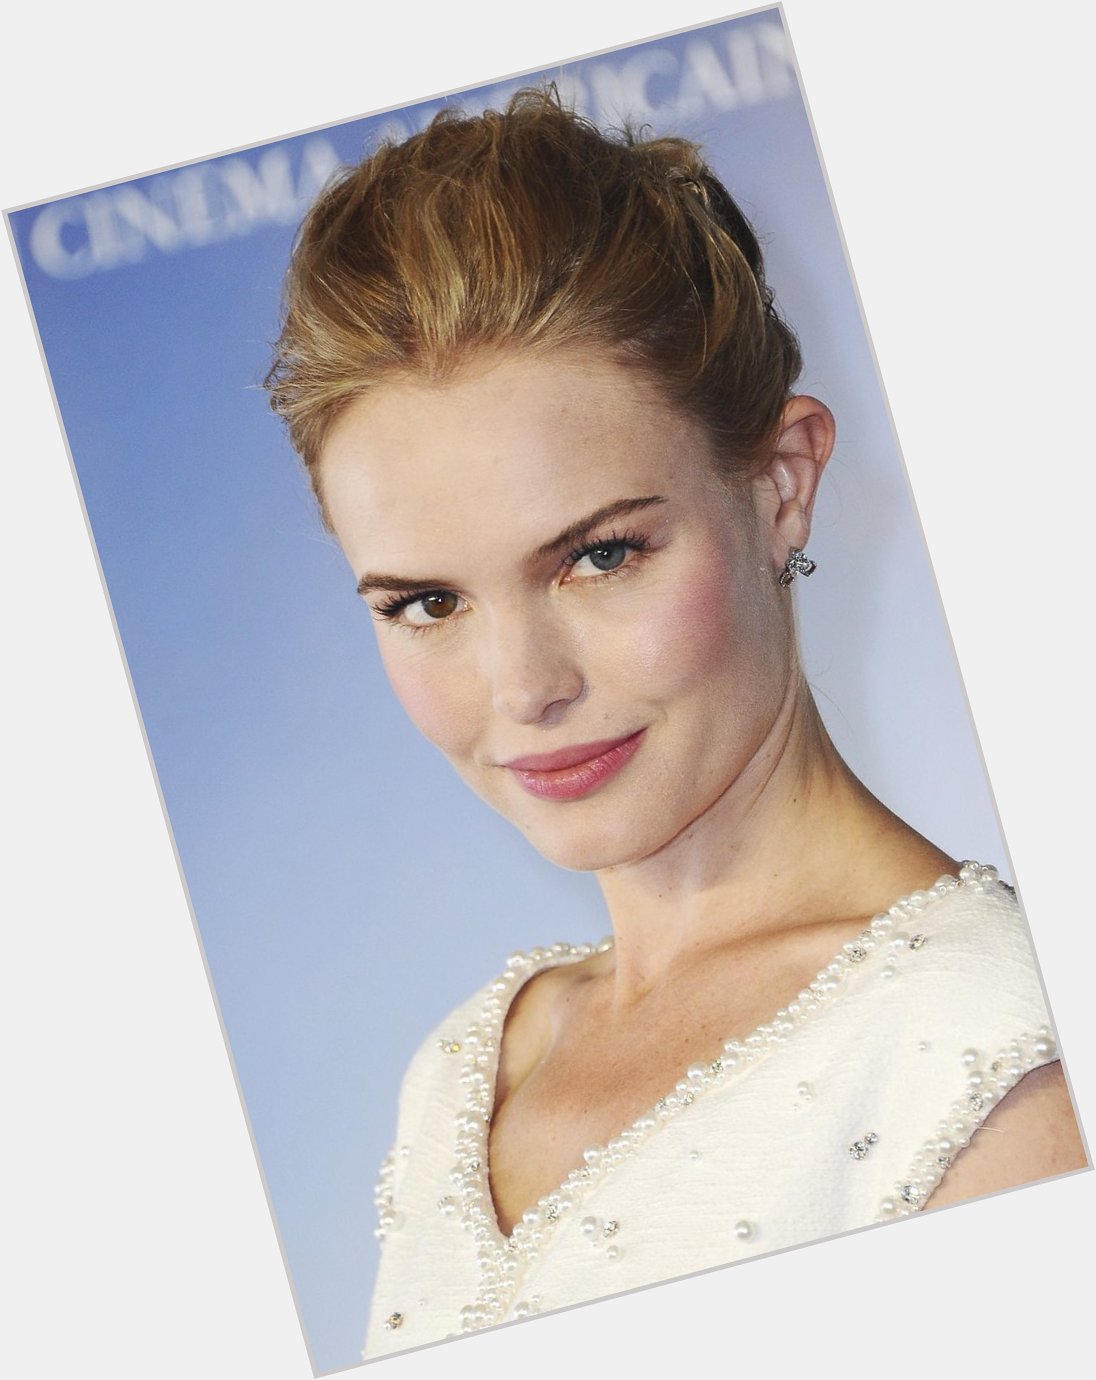 Wishing a Happy 38th Birthday to Kate Bosworth!Talented and amazing actress!        